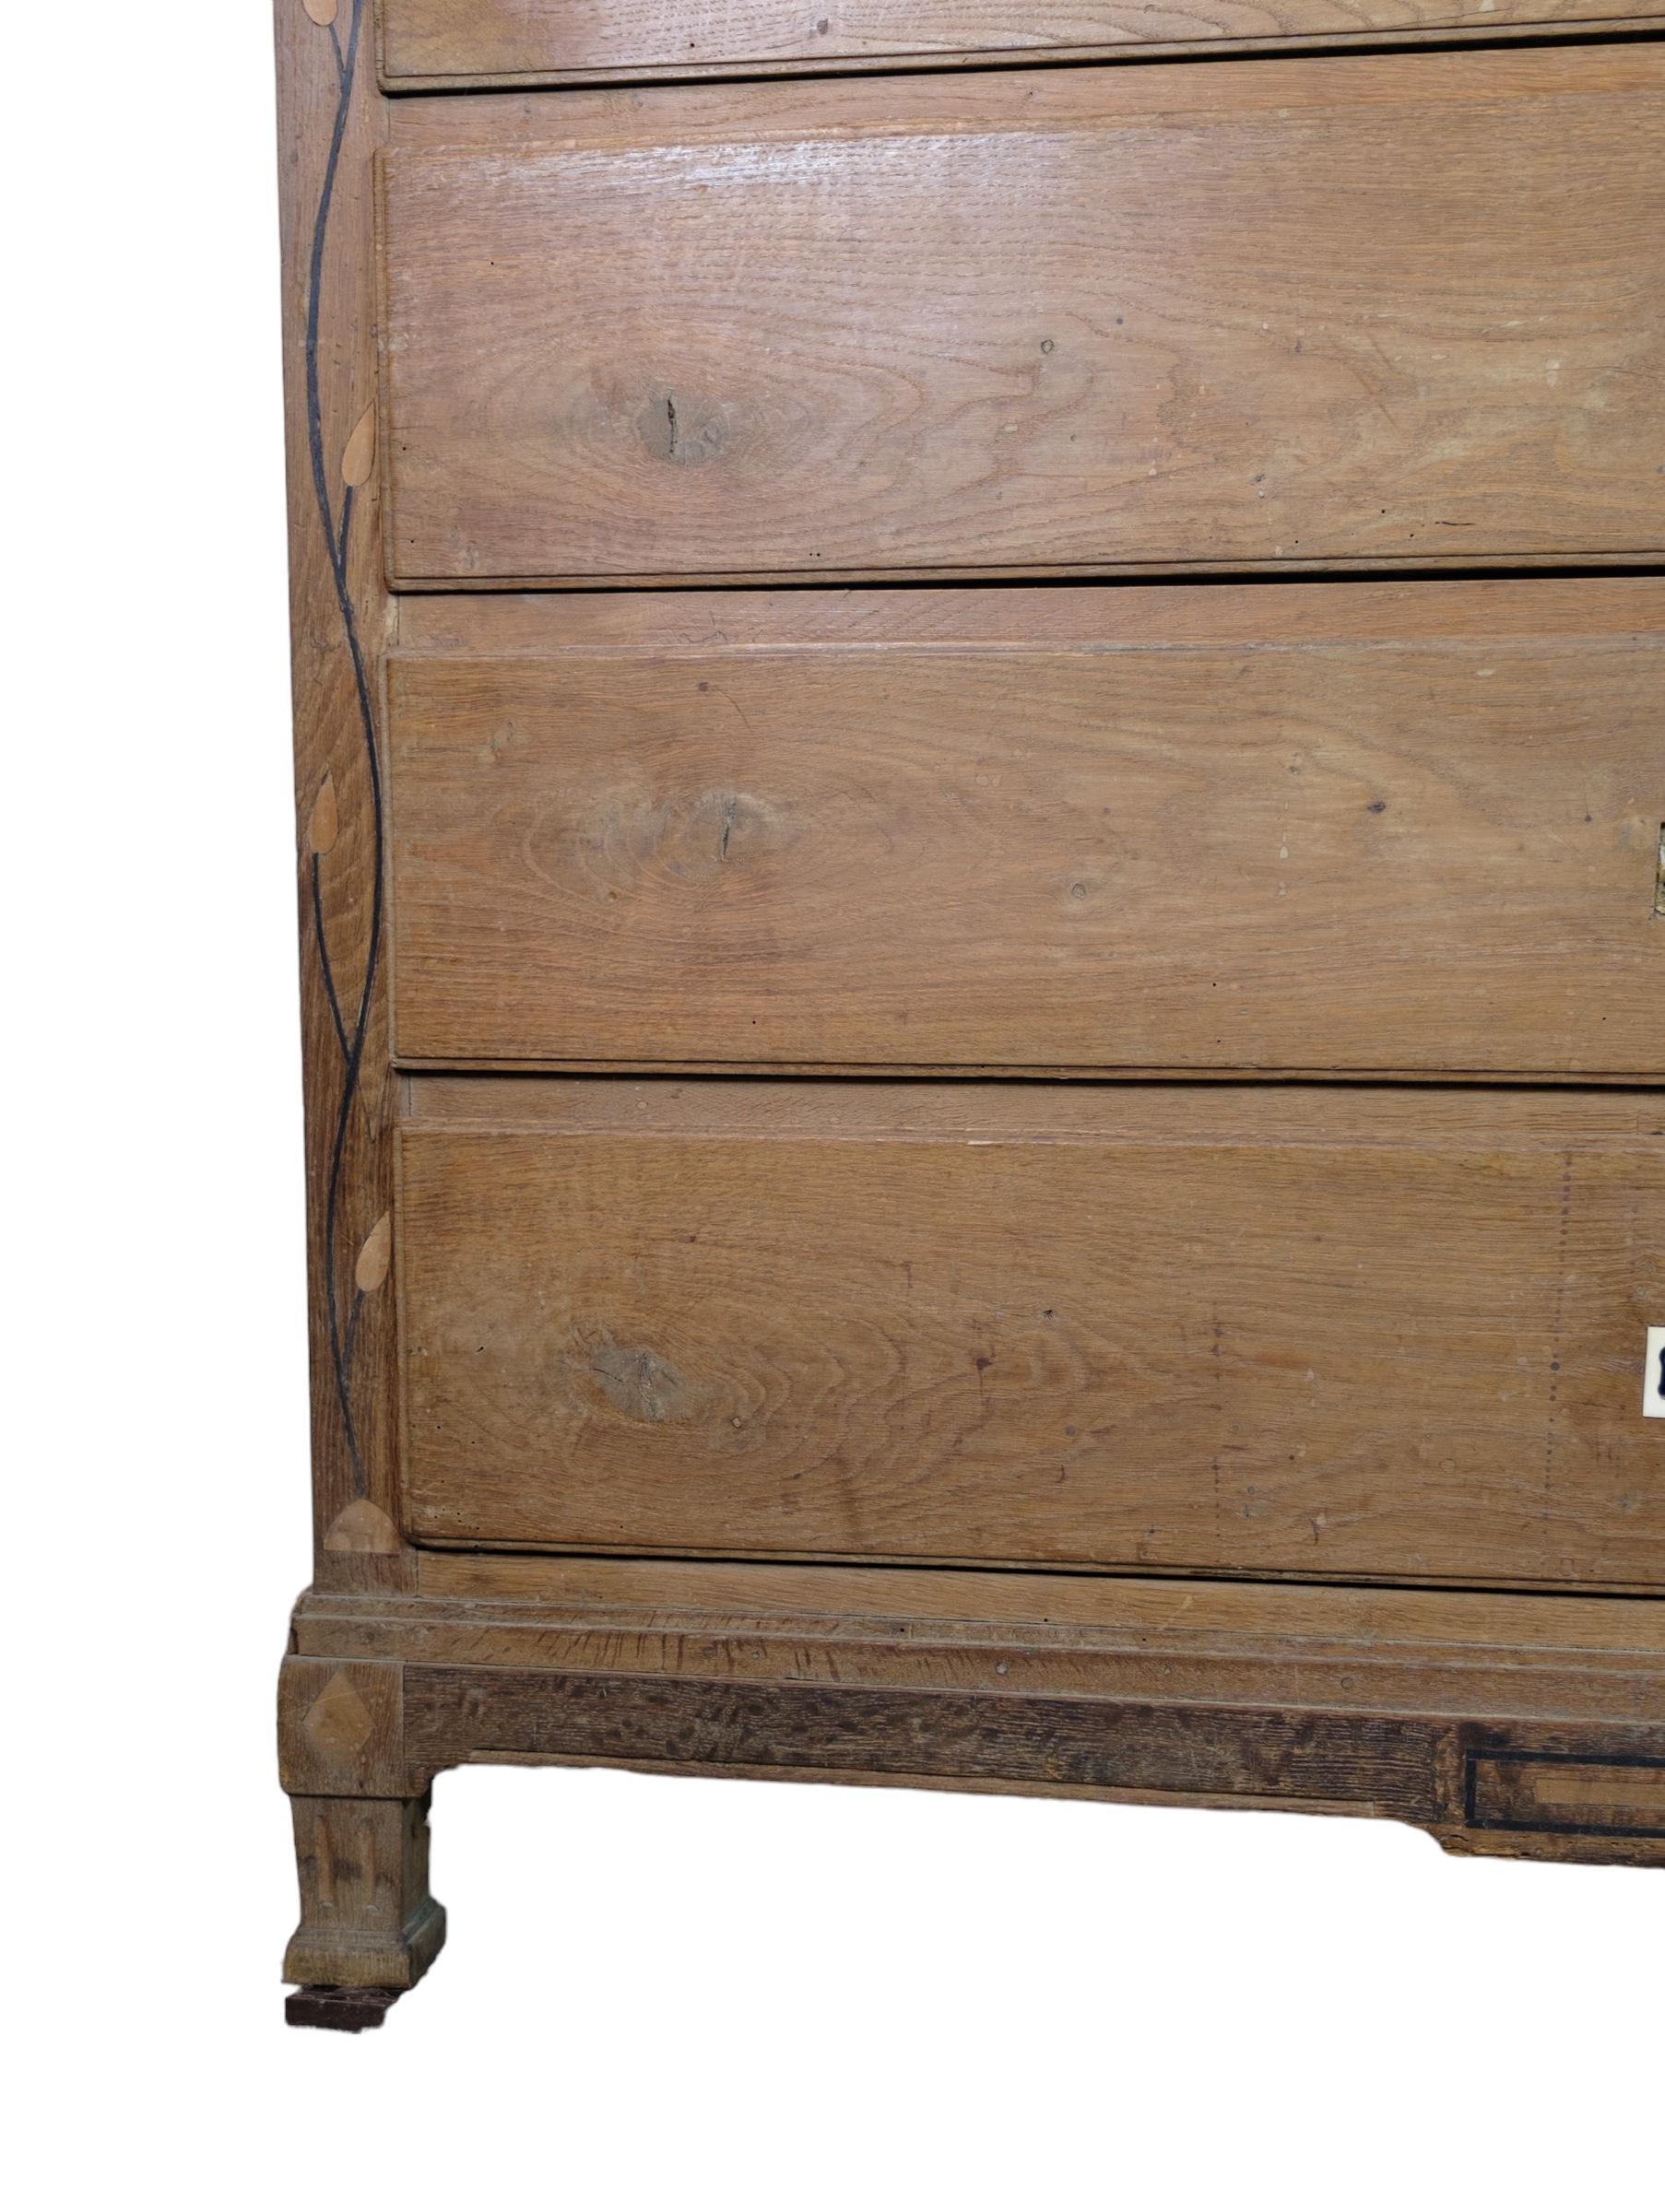 Frisian-style oak chest of drawers with 2 doors and 5 drawers from around the 1820s.
Measurements in cm: H:218 W:115.5 D:52